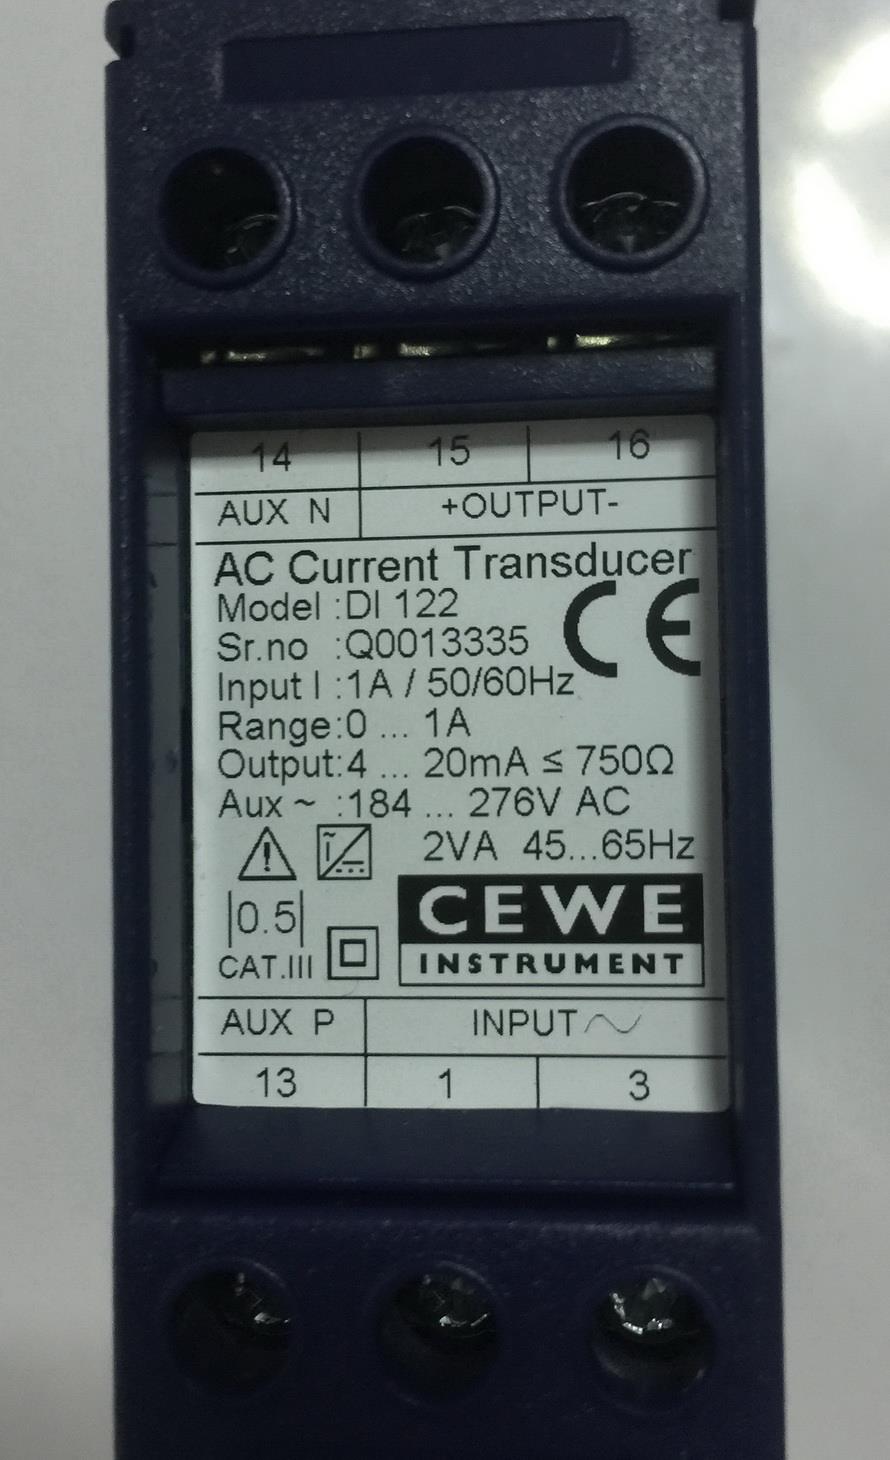 Cewe DI 122 Current Transducer ,Current Transducer, Transducer, Cewe, DI 122 , Power Transducer, Power Transmitter,Cewe Instruments,Machinery and Process Equipment/Transducers